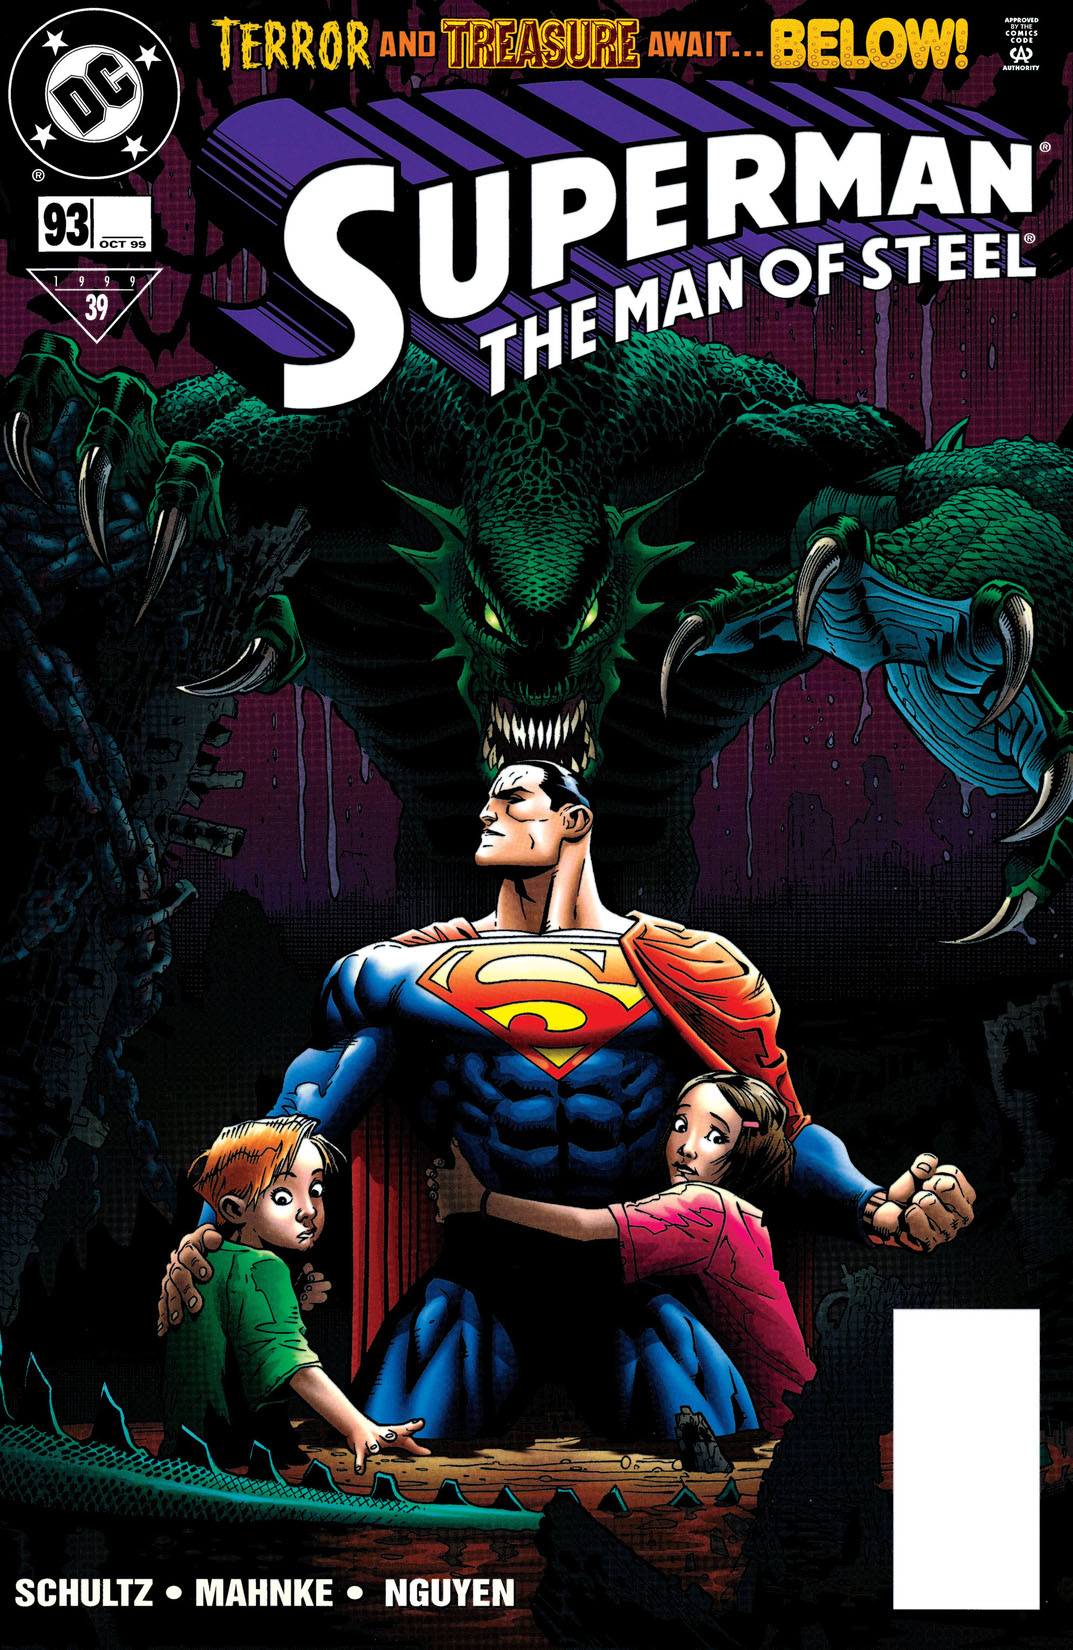 Superman: The Man of Steel #93 preview images